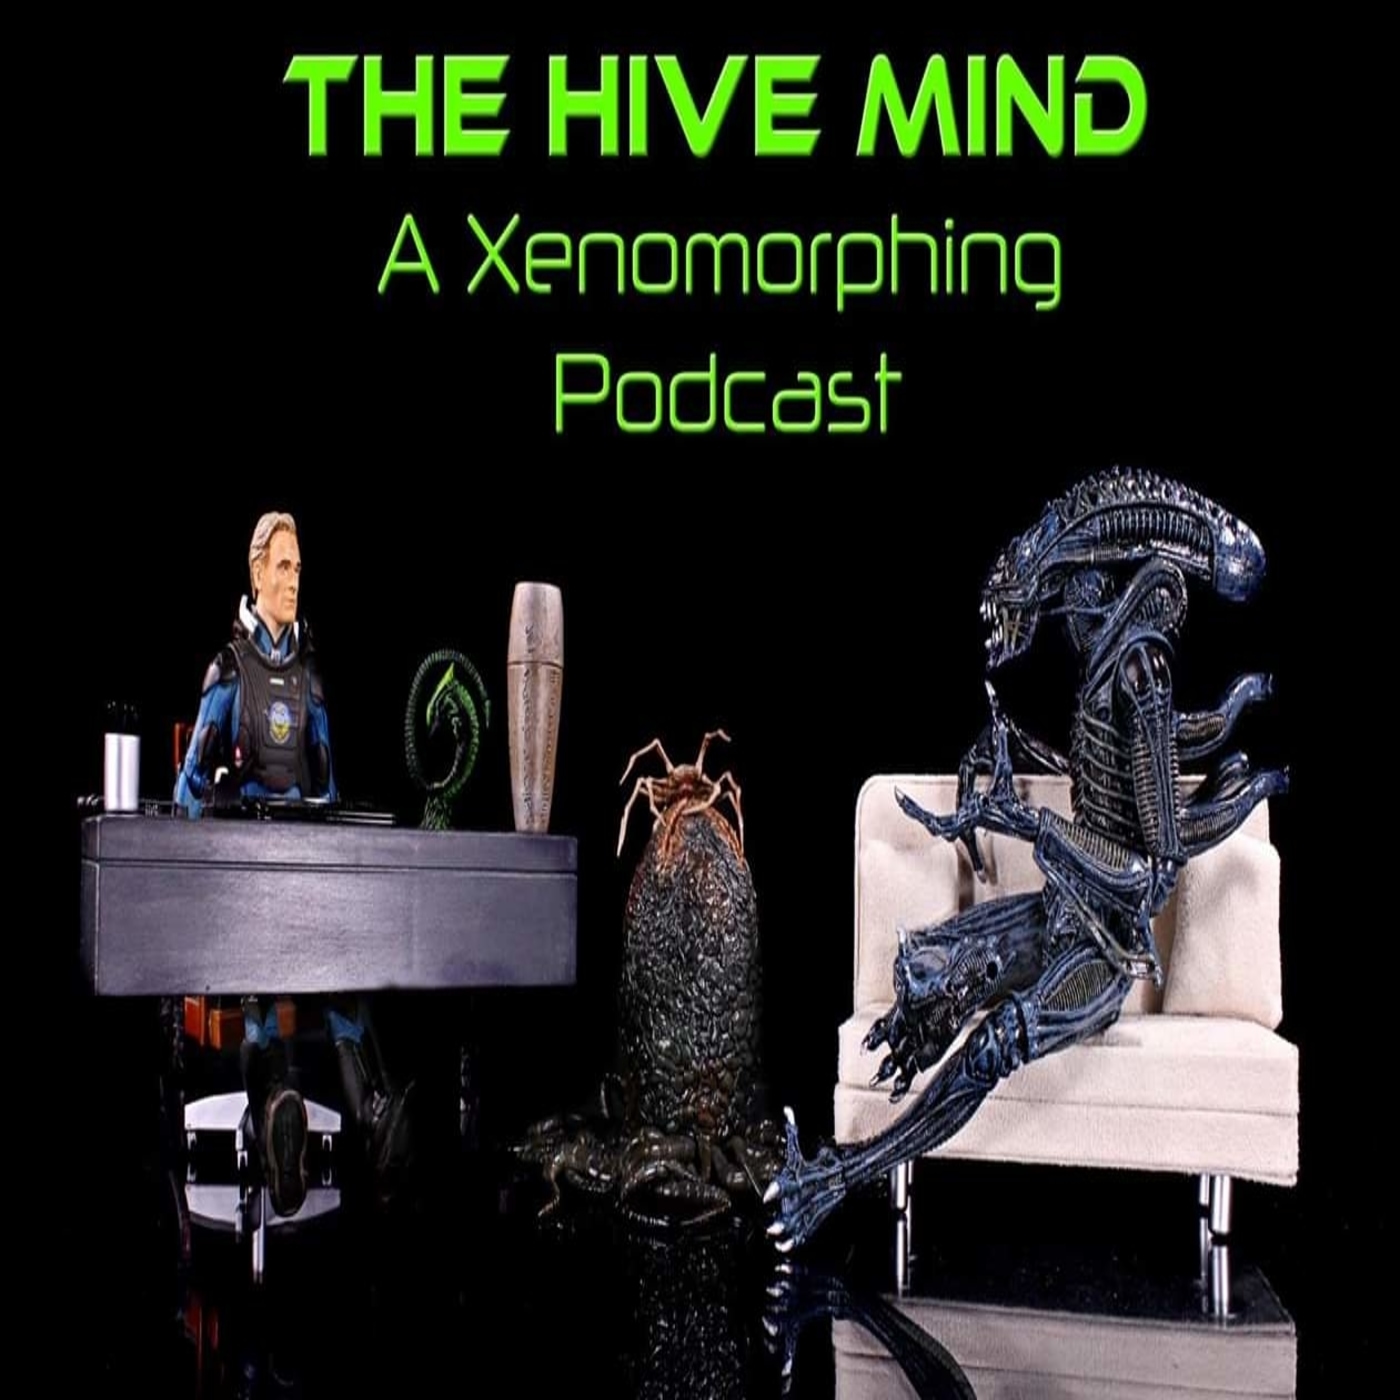 The Hive Mind: A Xenomorphing Podcast